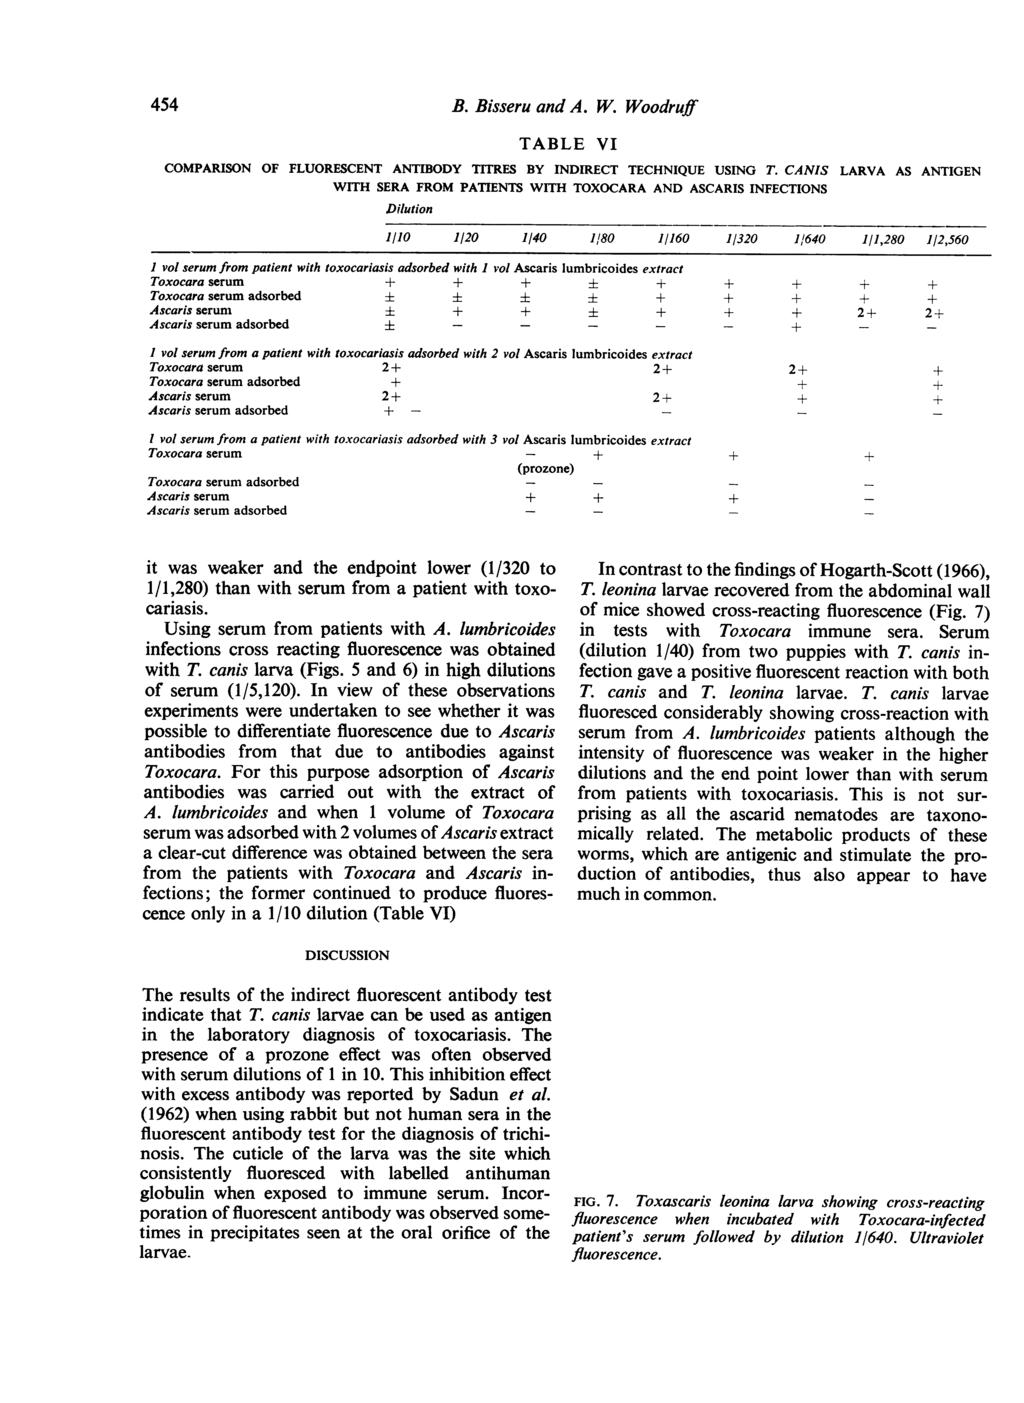 44 B. Bisseru and A. W. Woodruff TABLE VI COMPARISON OF FLUORESCENT ANTIBODY TITRES BY INDIRECT TECHNIQUE USING T.